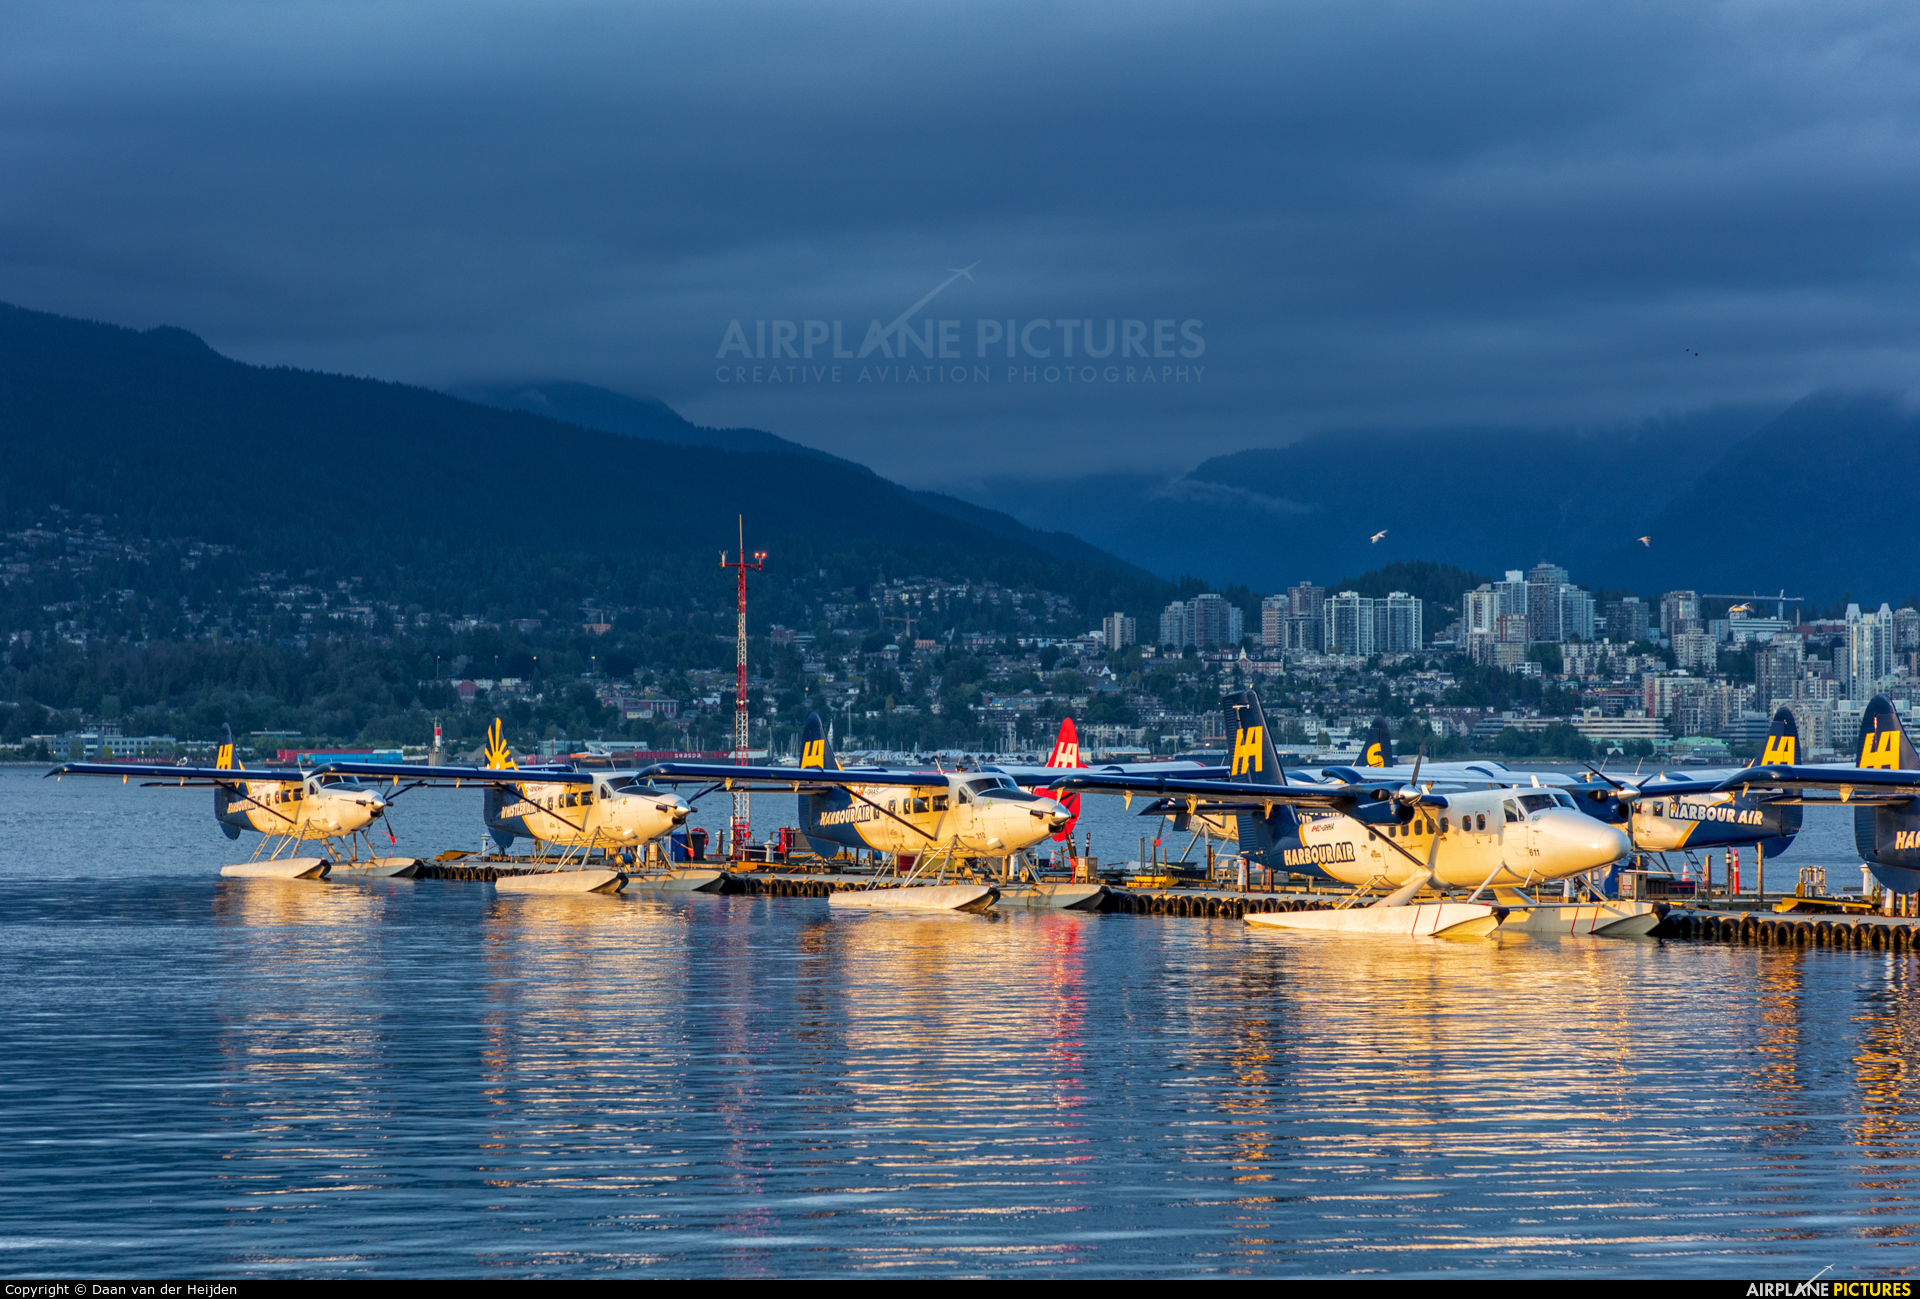 Harbour Air C-GHHA aircraft at Vancouver Coal Harbour, BC